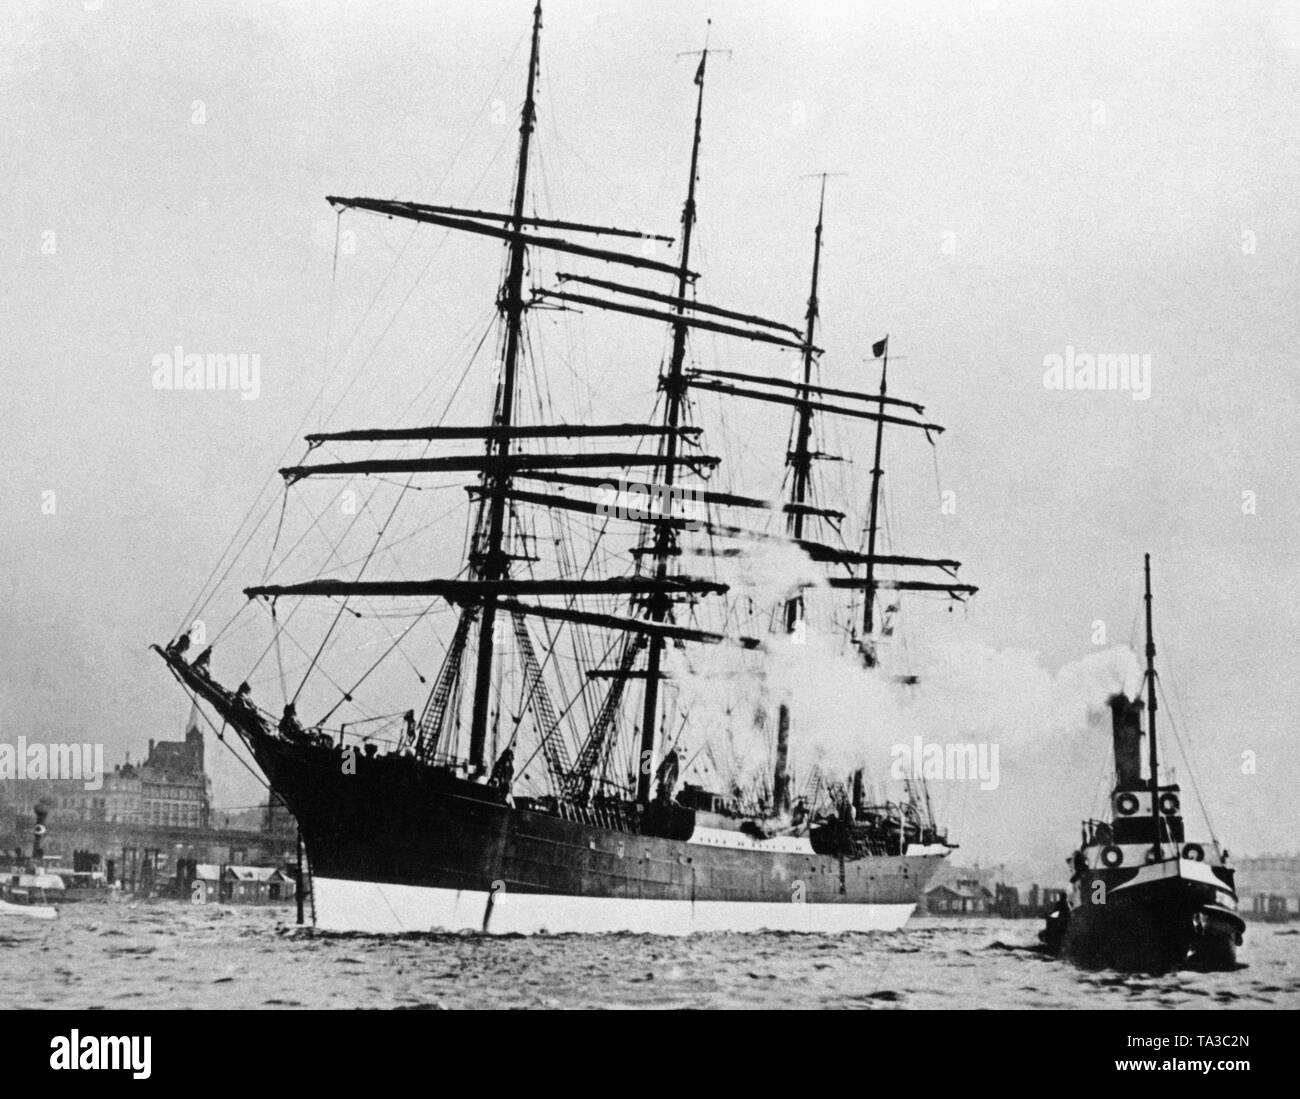 The four-masted barque 'Padua', one of the so-called 'Flying-P-Liner' of the shipping company Laeisz leaves the port of Hamburg to participate in a regatta to Australia. Stock Photo